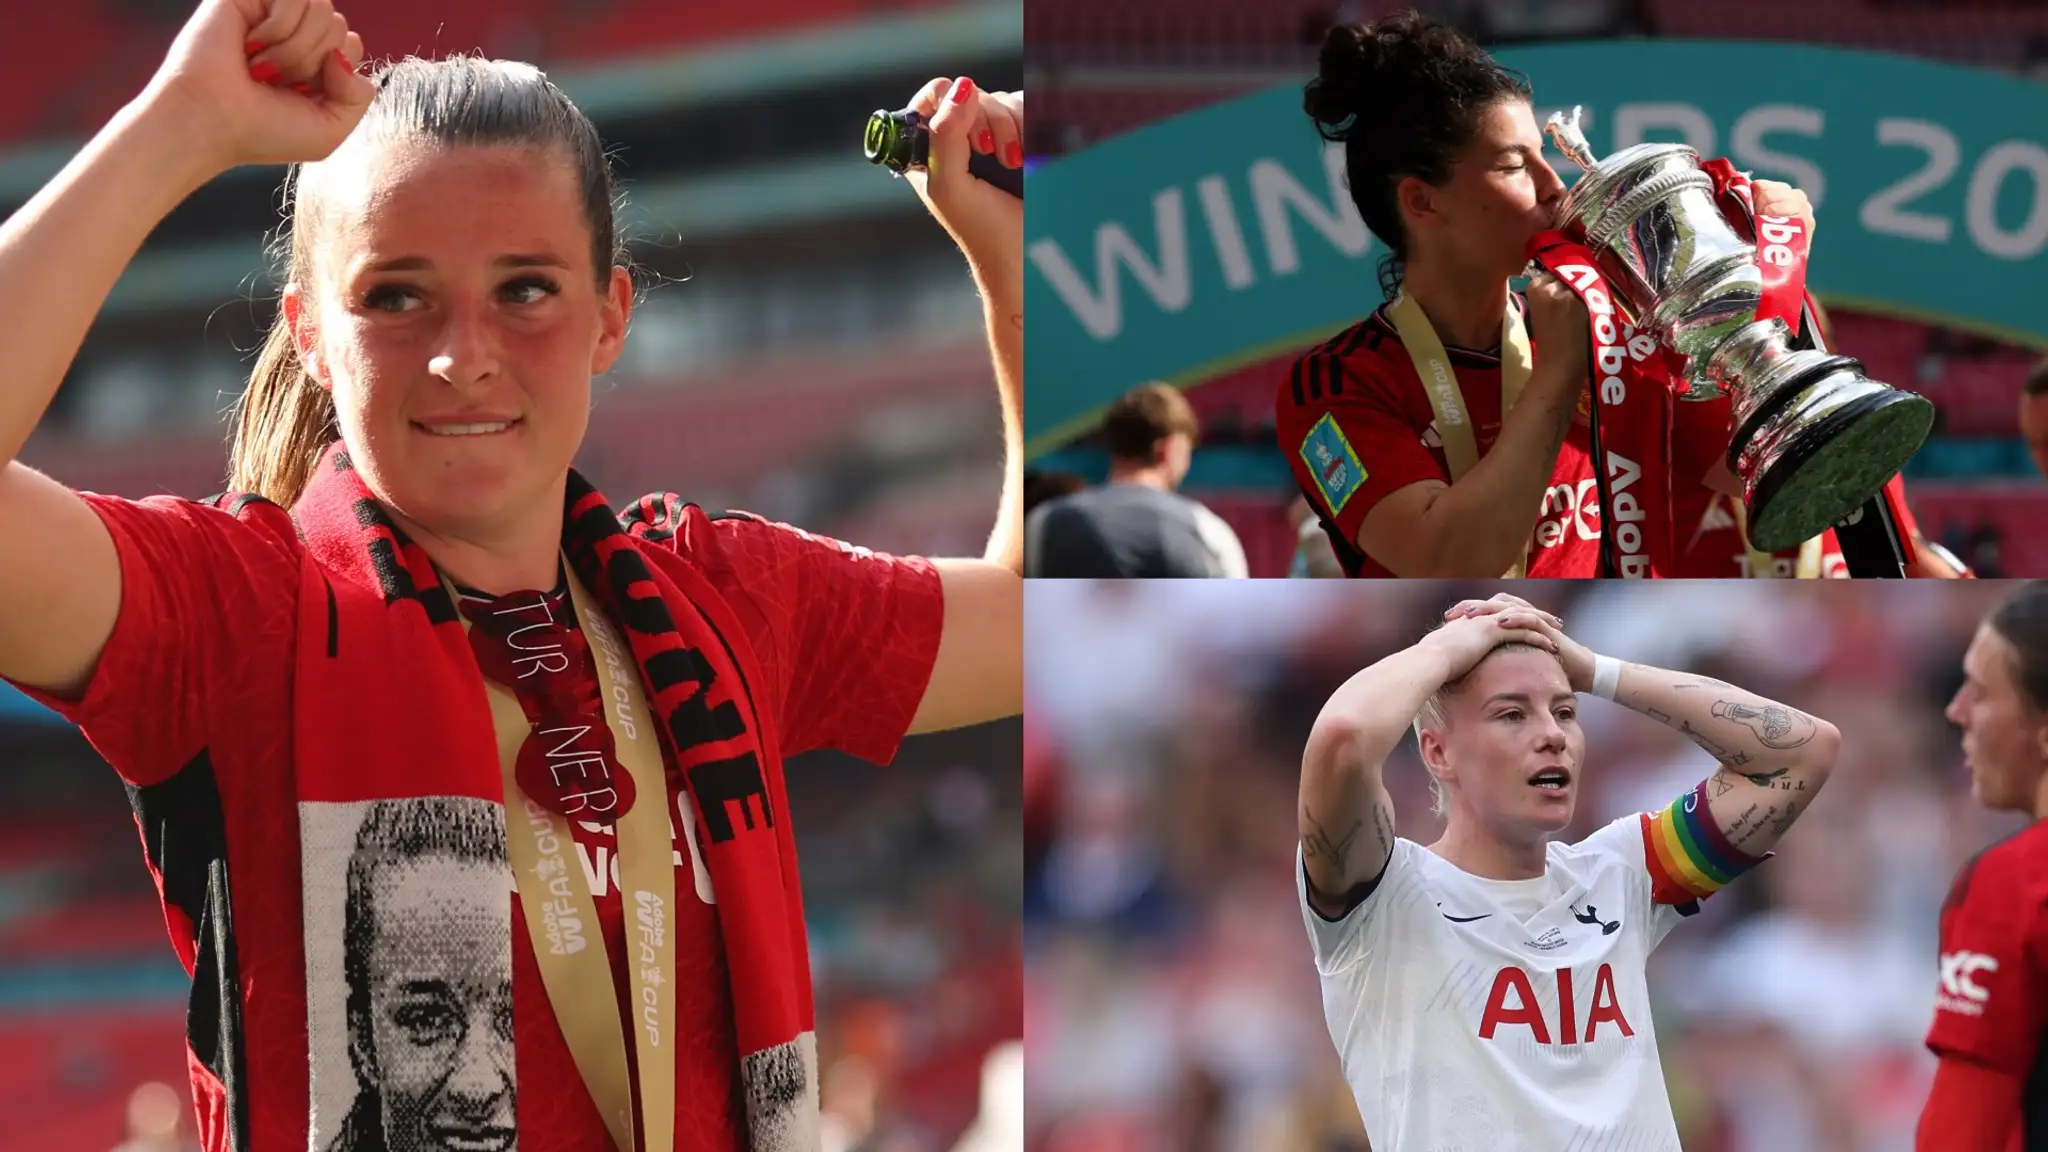 Ella Toone and Man Utd have made history! Winners and losers as Red Devils claim first-ever trophy with Women's FA Cup triumph while Bethany England goes missing at Wembley for Tottenham